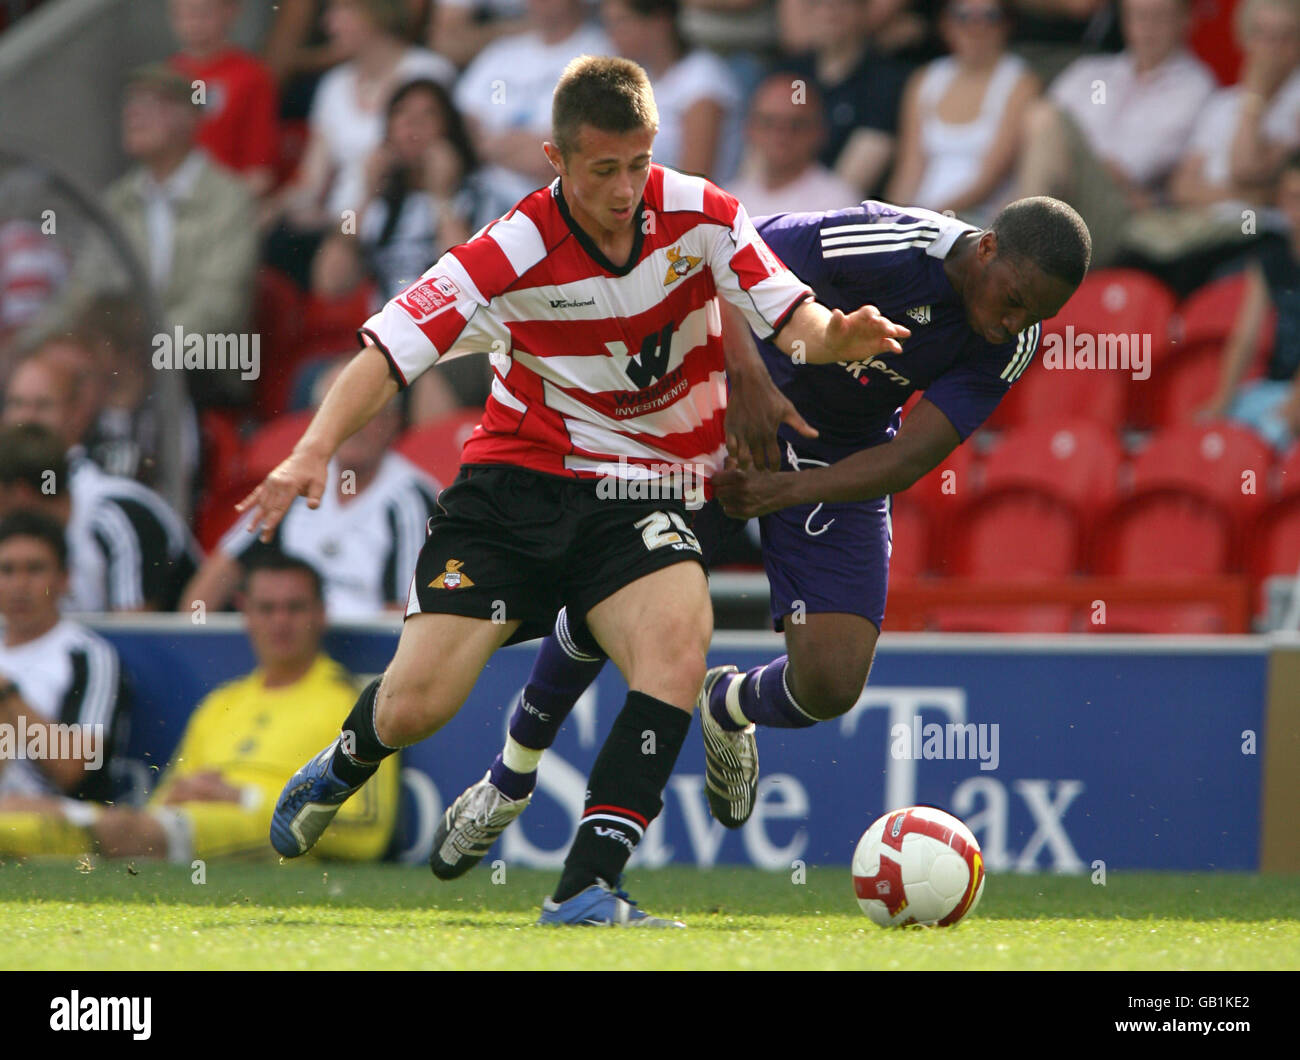 Doncaster Rovers' Waide Fairhurst battles for the ball with Newcastle United's Charles N'Zogbia. Stock Photo